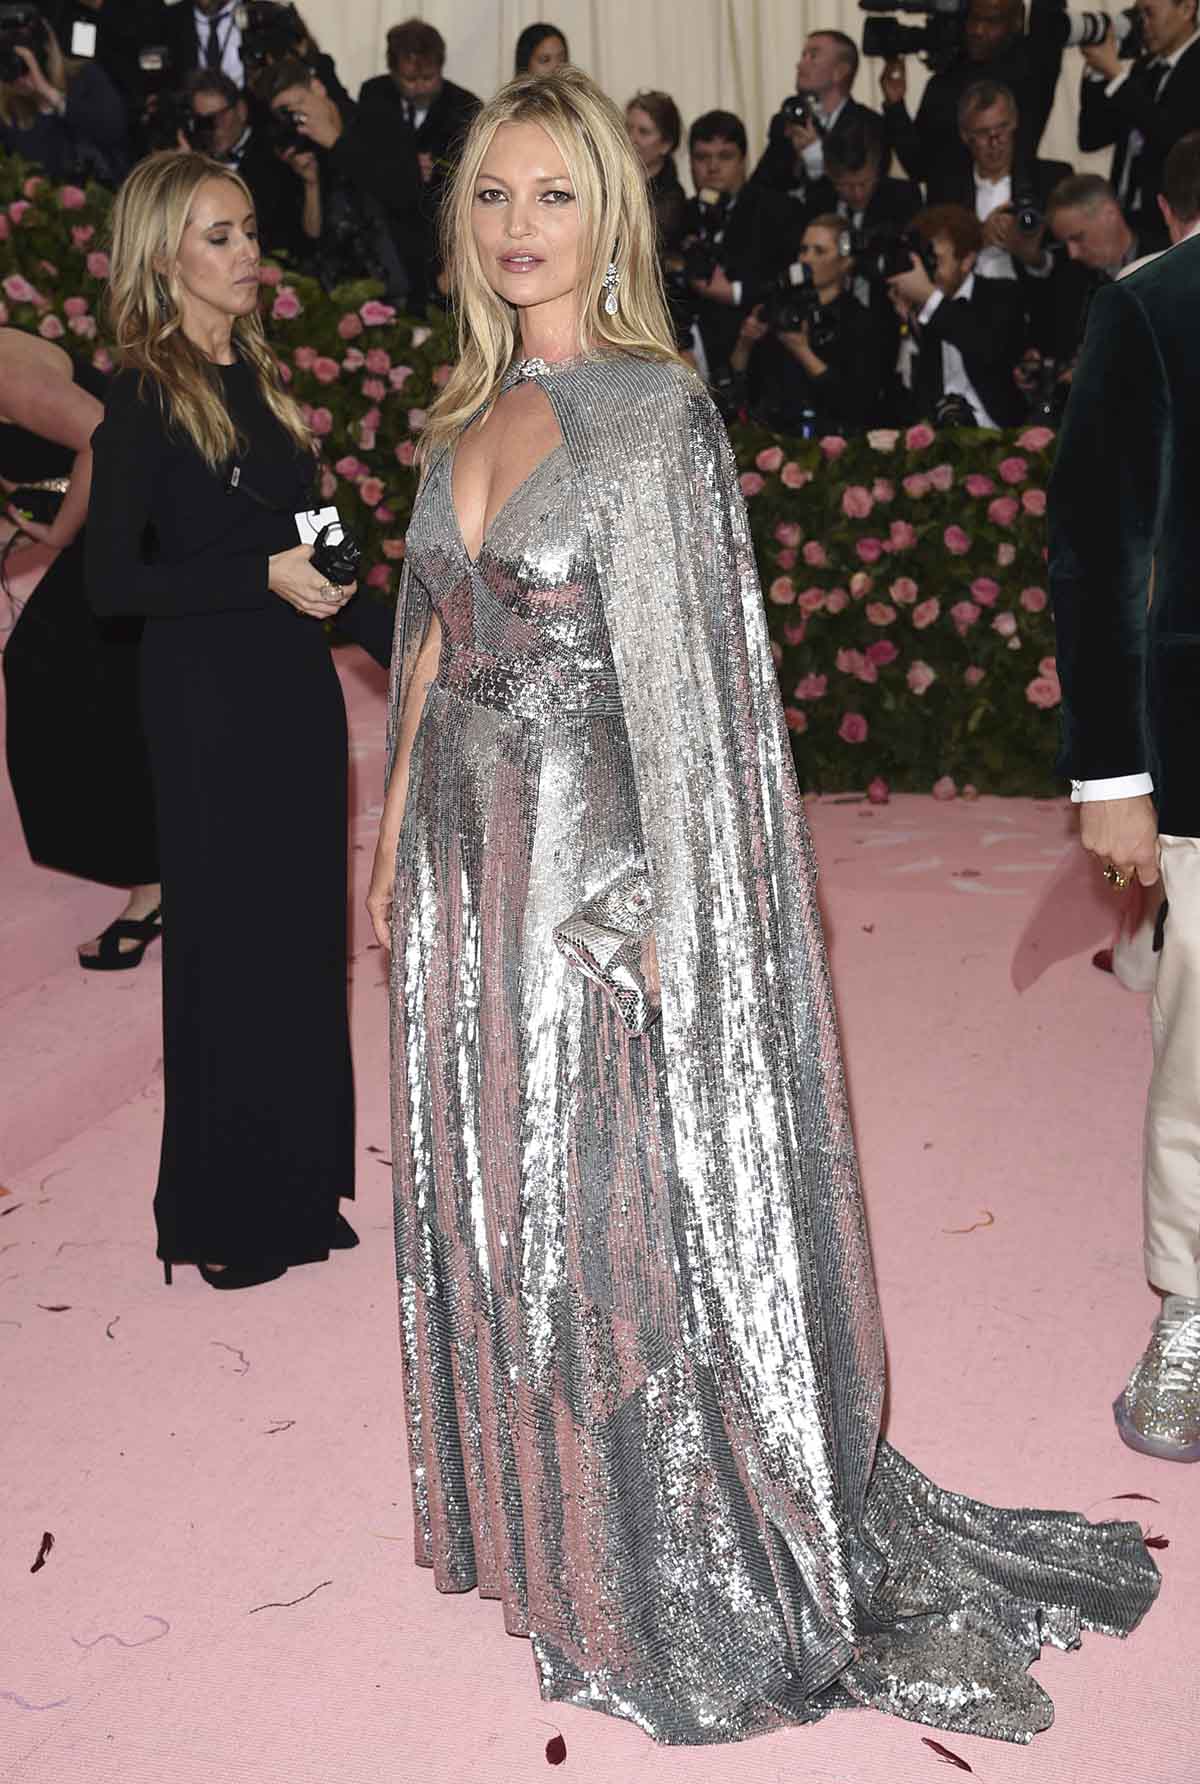 Model Kate Moss at The Metropolitan Museum of Art's Costume Institute benefit gala celebrating the opening of the "Camp: Notes on Fashion" exhibition on Monday, May 6, 2019, in New York.